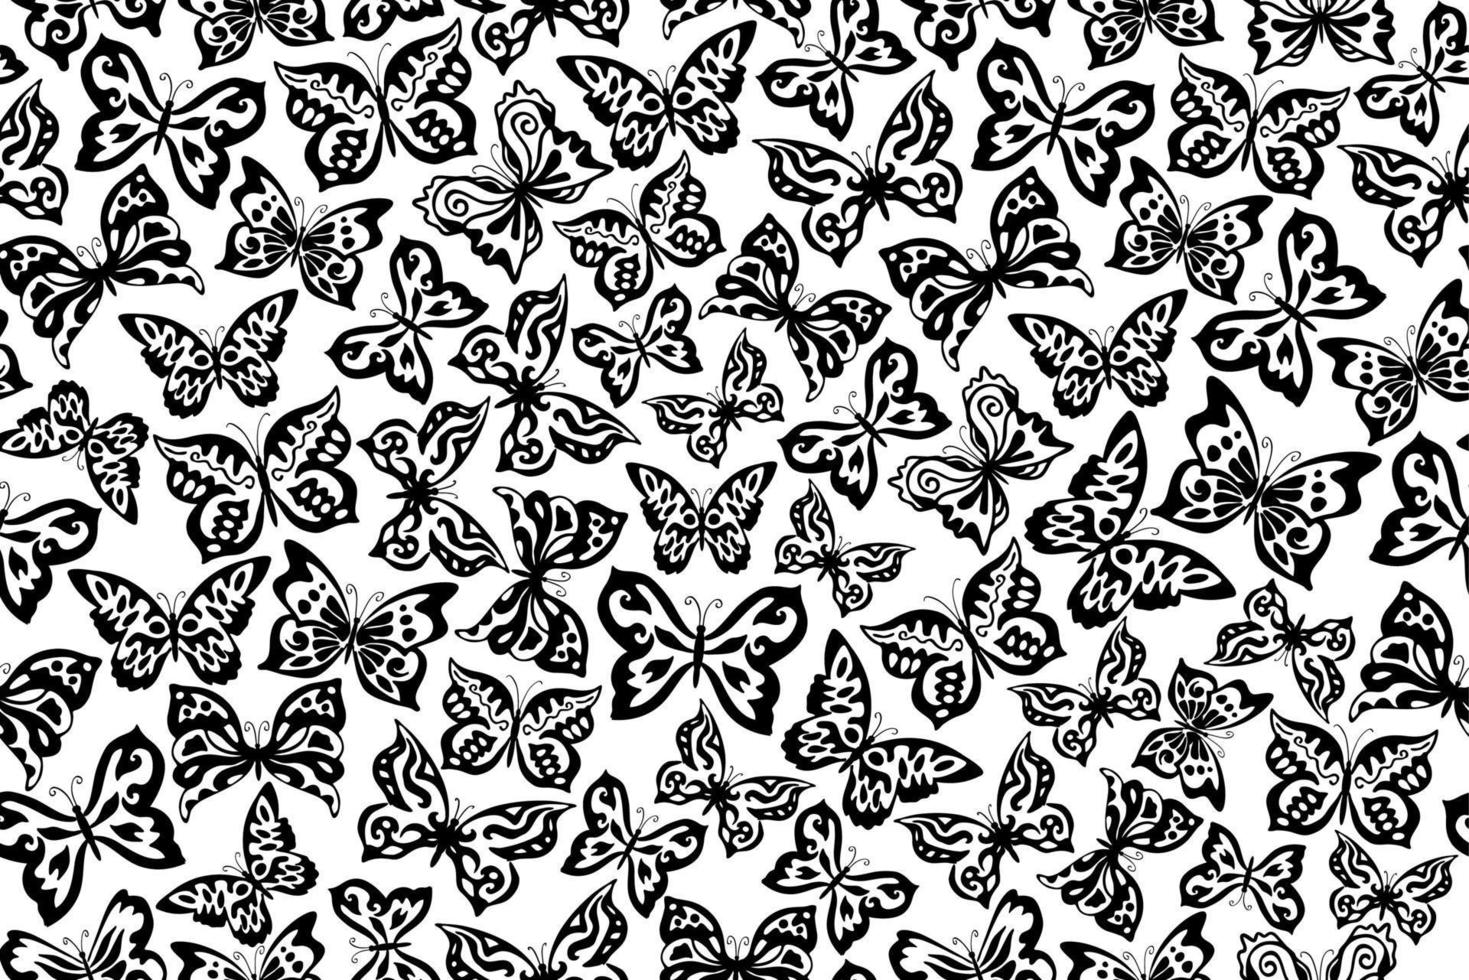 Vector seamless pattern. Black and white butterflies repeating pattern, ornate butterfly pattern.